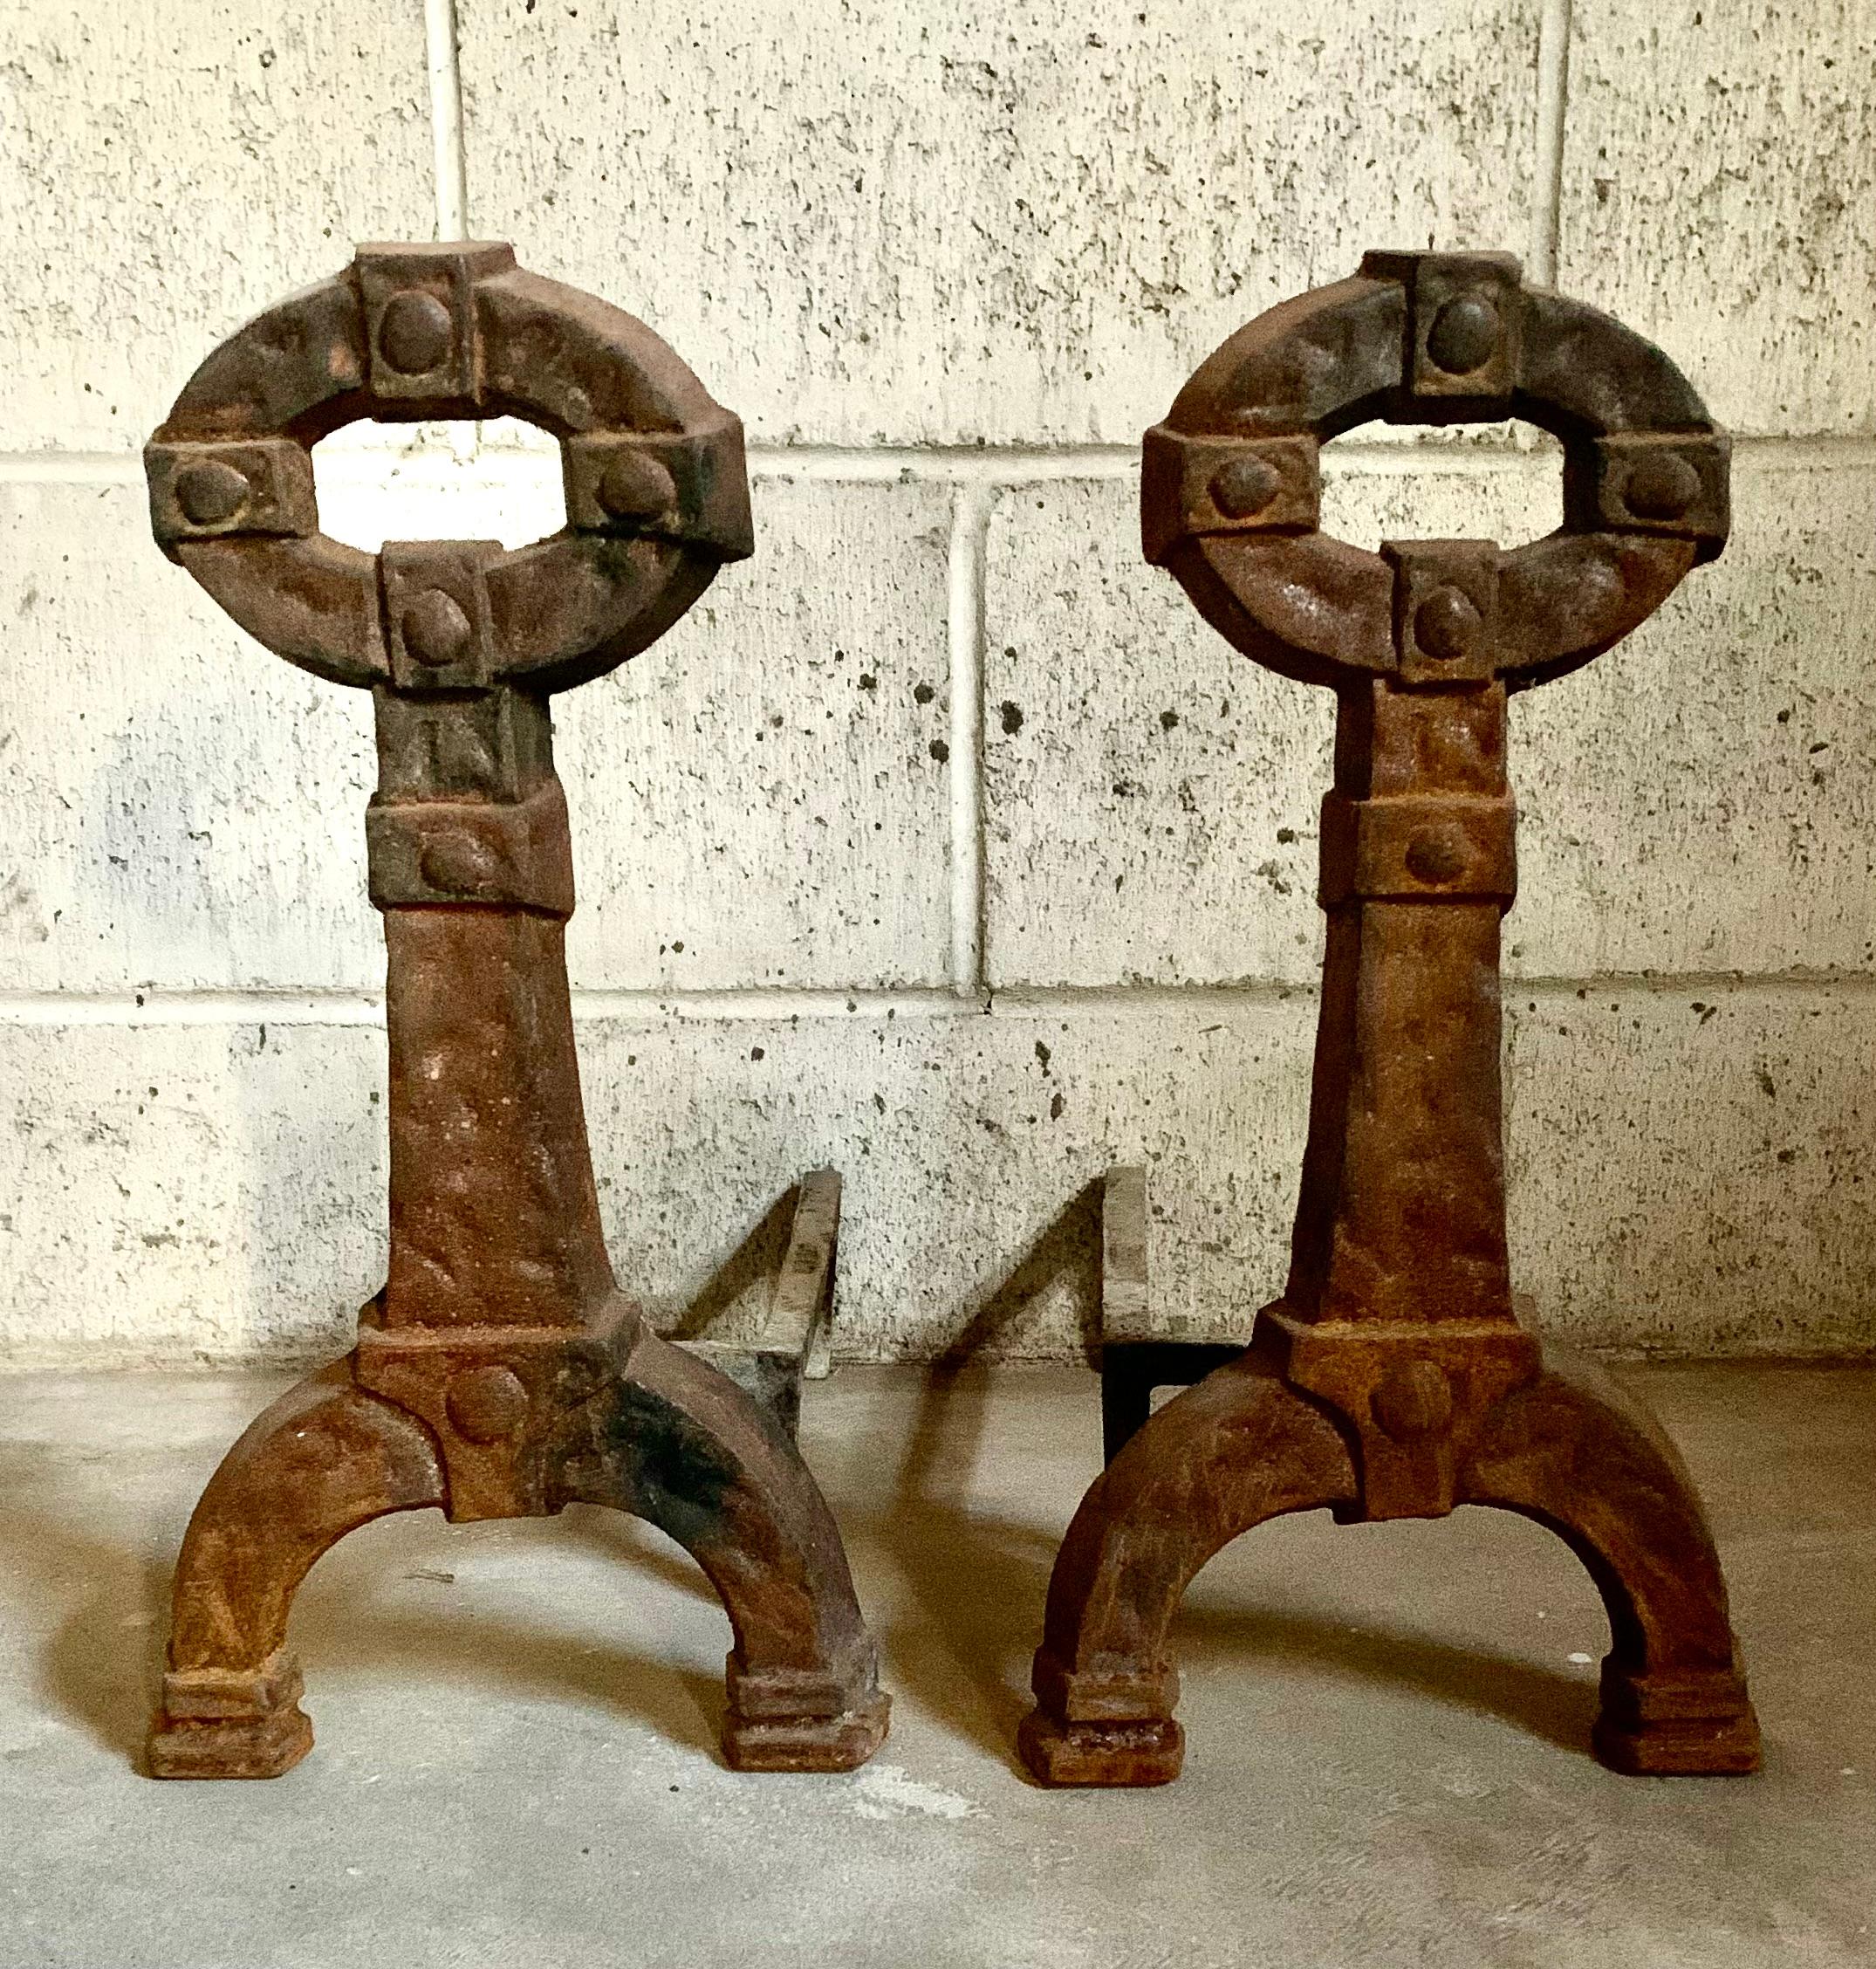 Pair early 20th Century Mission Arts and Crafts style cast iron andirons.
Beautiful, rich original patina.
Proponets of Mission, Prairie School and Arts and Crafts movements in the United States included Frank Lloyd Wright, Gustav Stickley, Charles